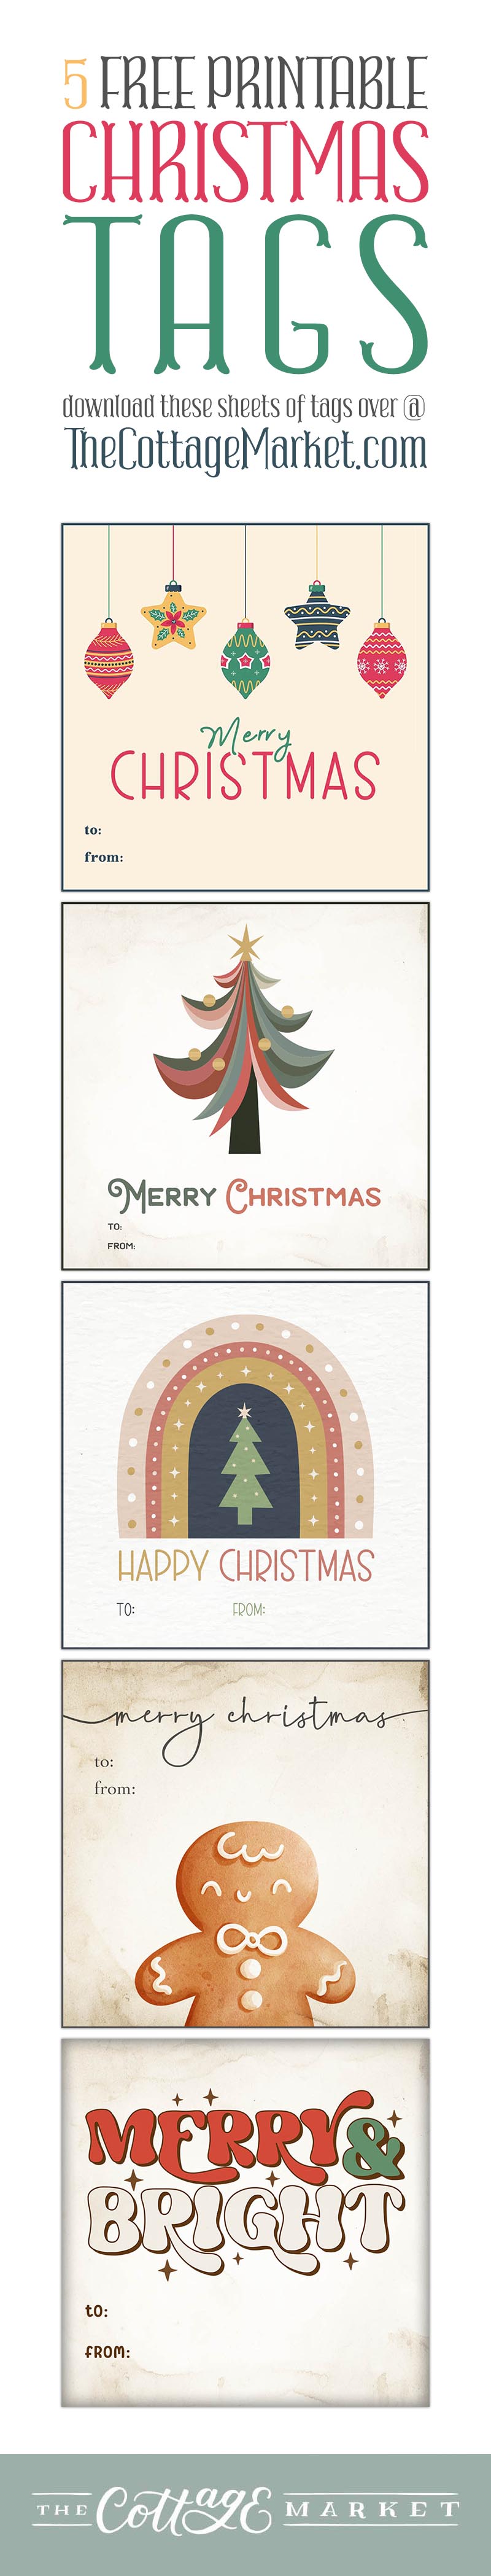 These cute little Free Printable Christmas Tags are just waiting to adorn your presents for all your friends and family this Holiday Season!